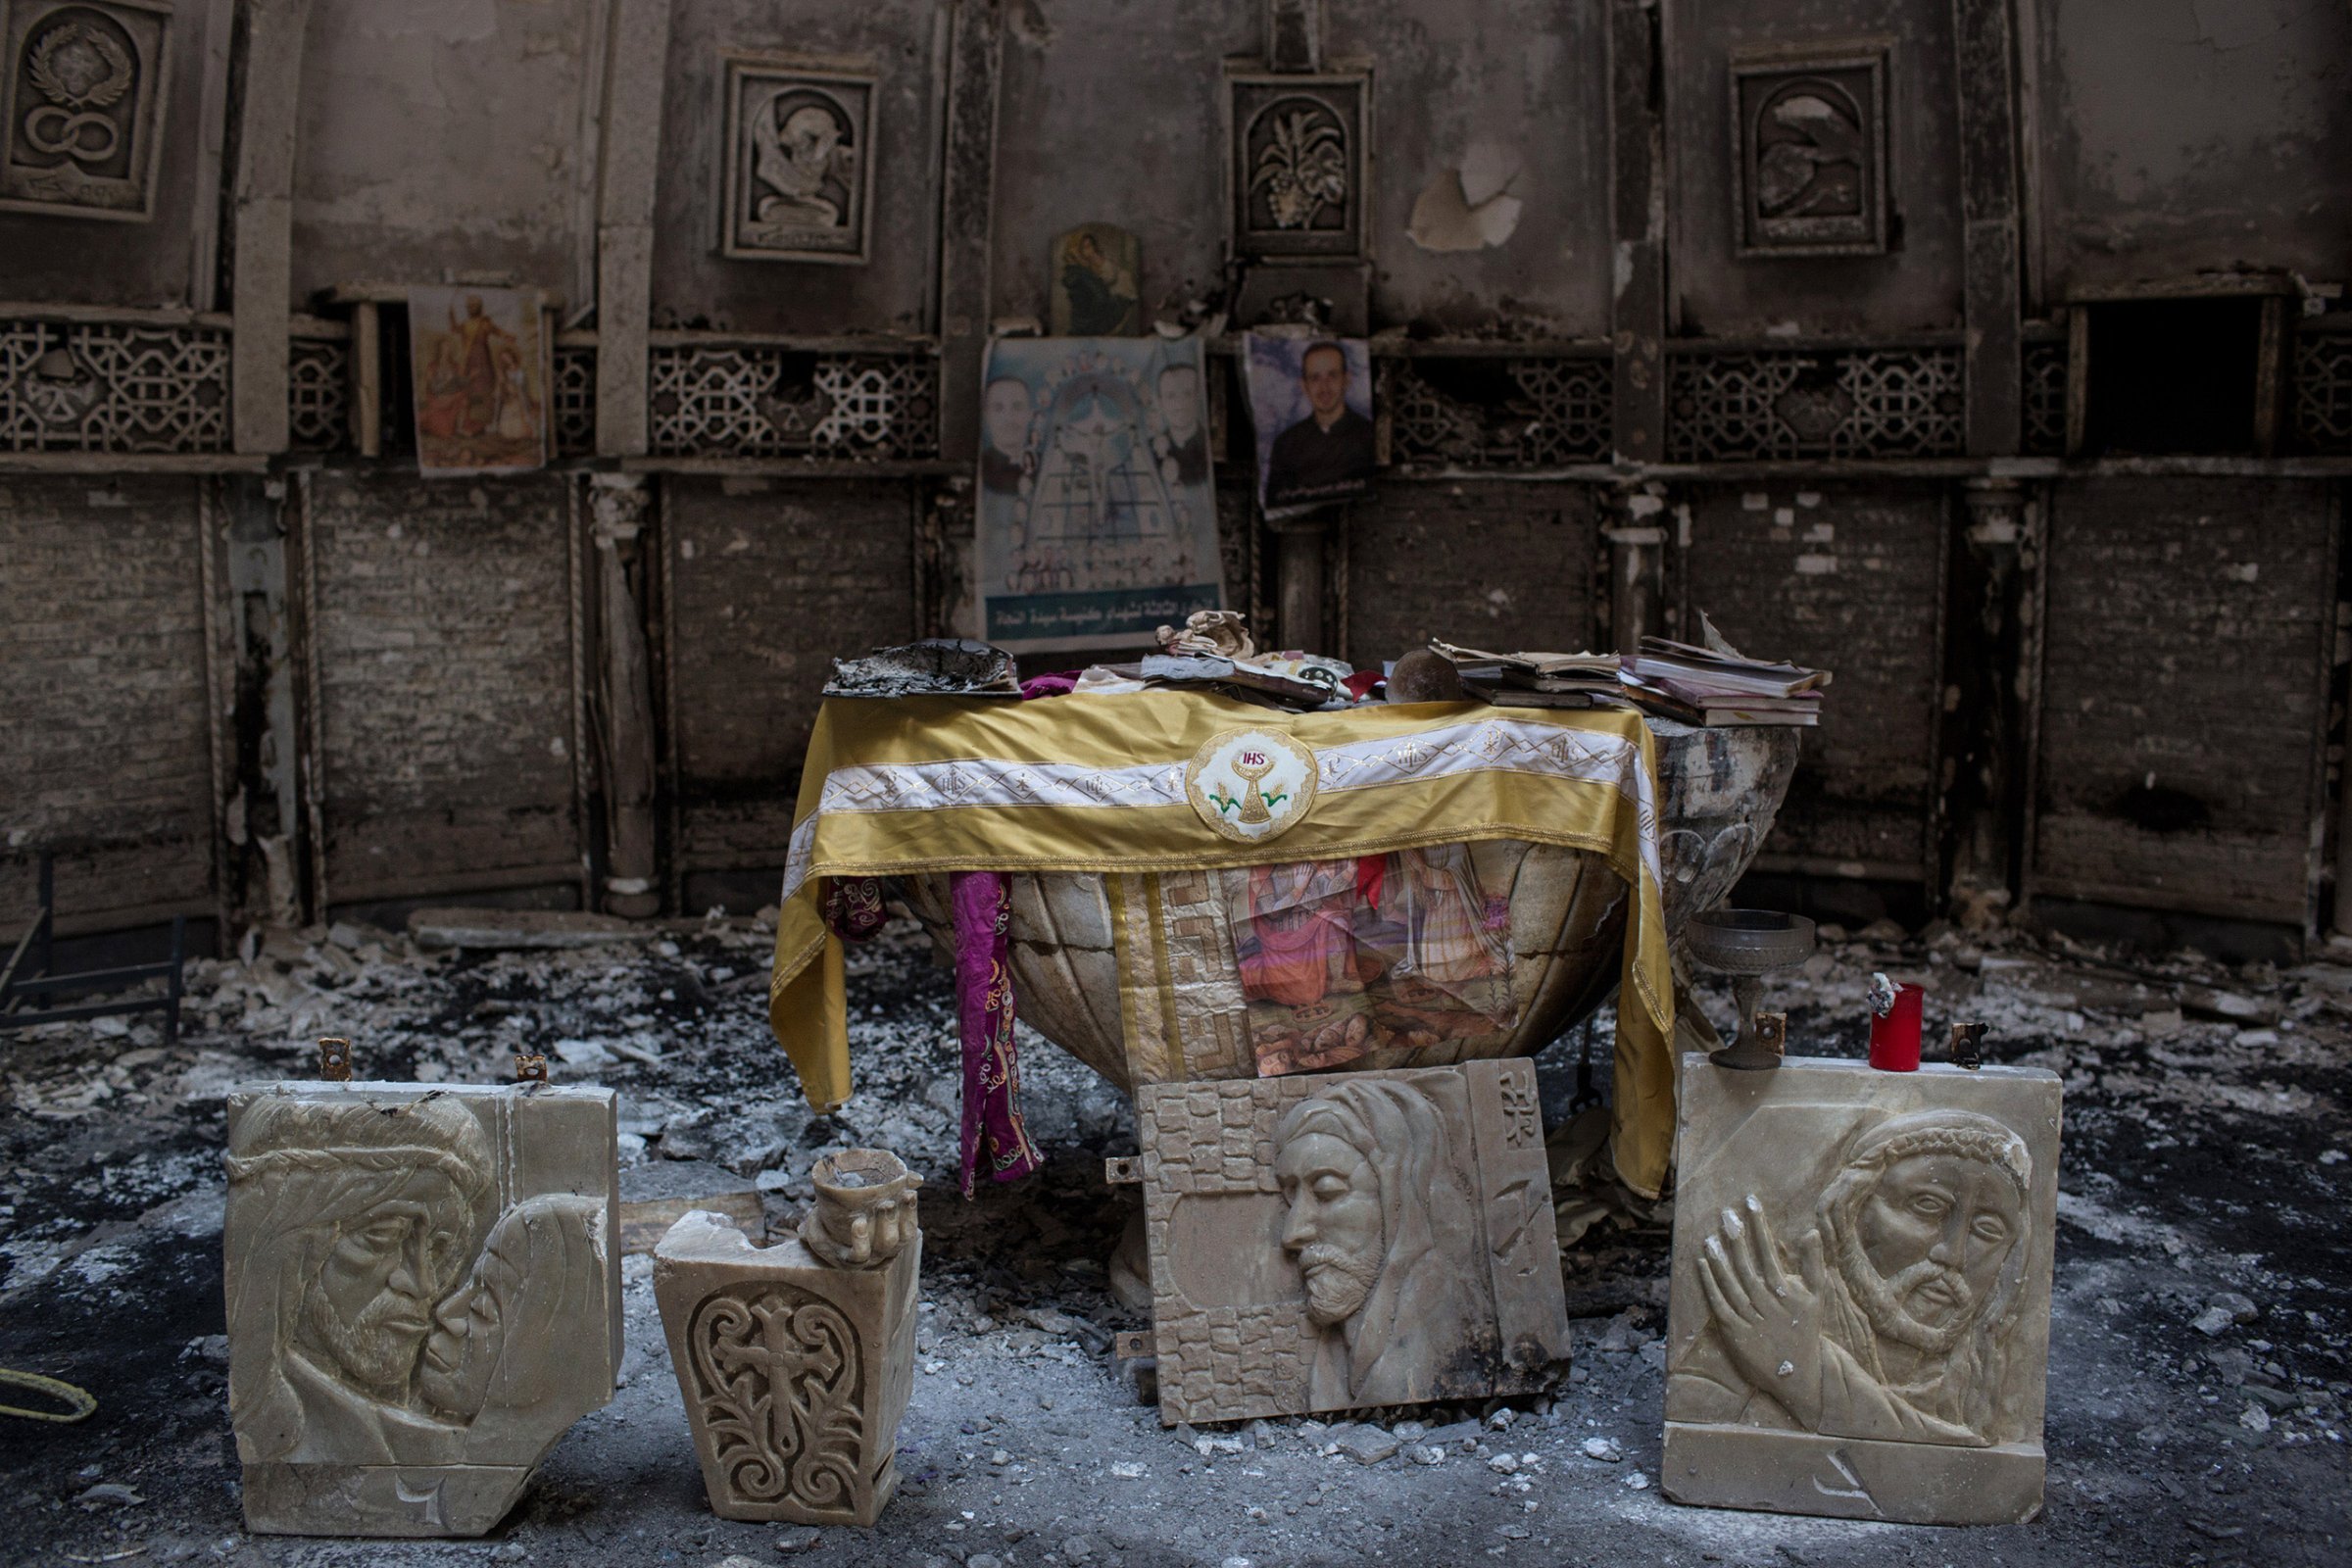 Salvaged books and other items are placed around the altar of a church, burned and destroyed by ISIS during the group's occupation of the predominantly Christian town of Qaraqosh, Iraq, on Dec. 27, 2016.